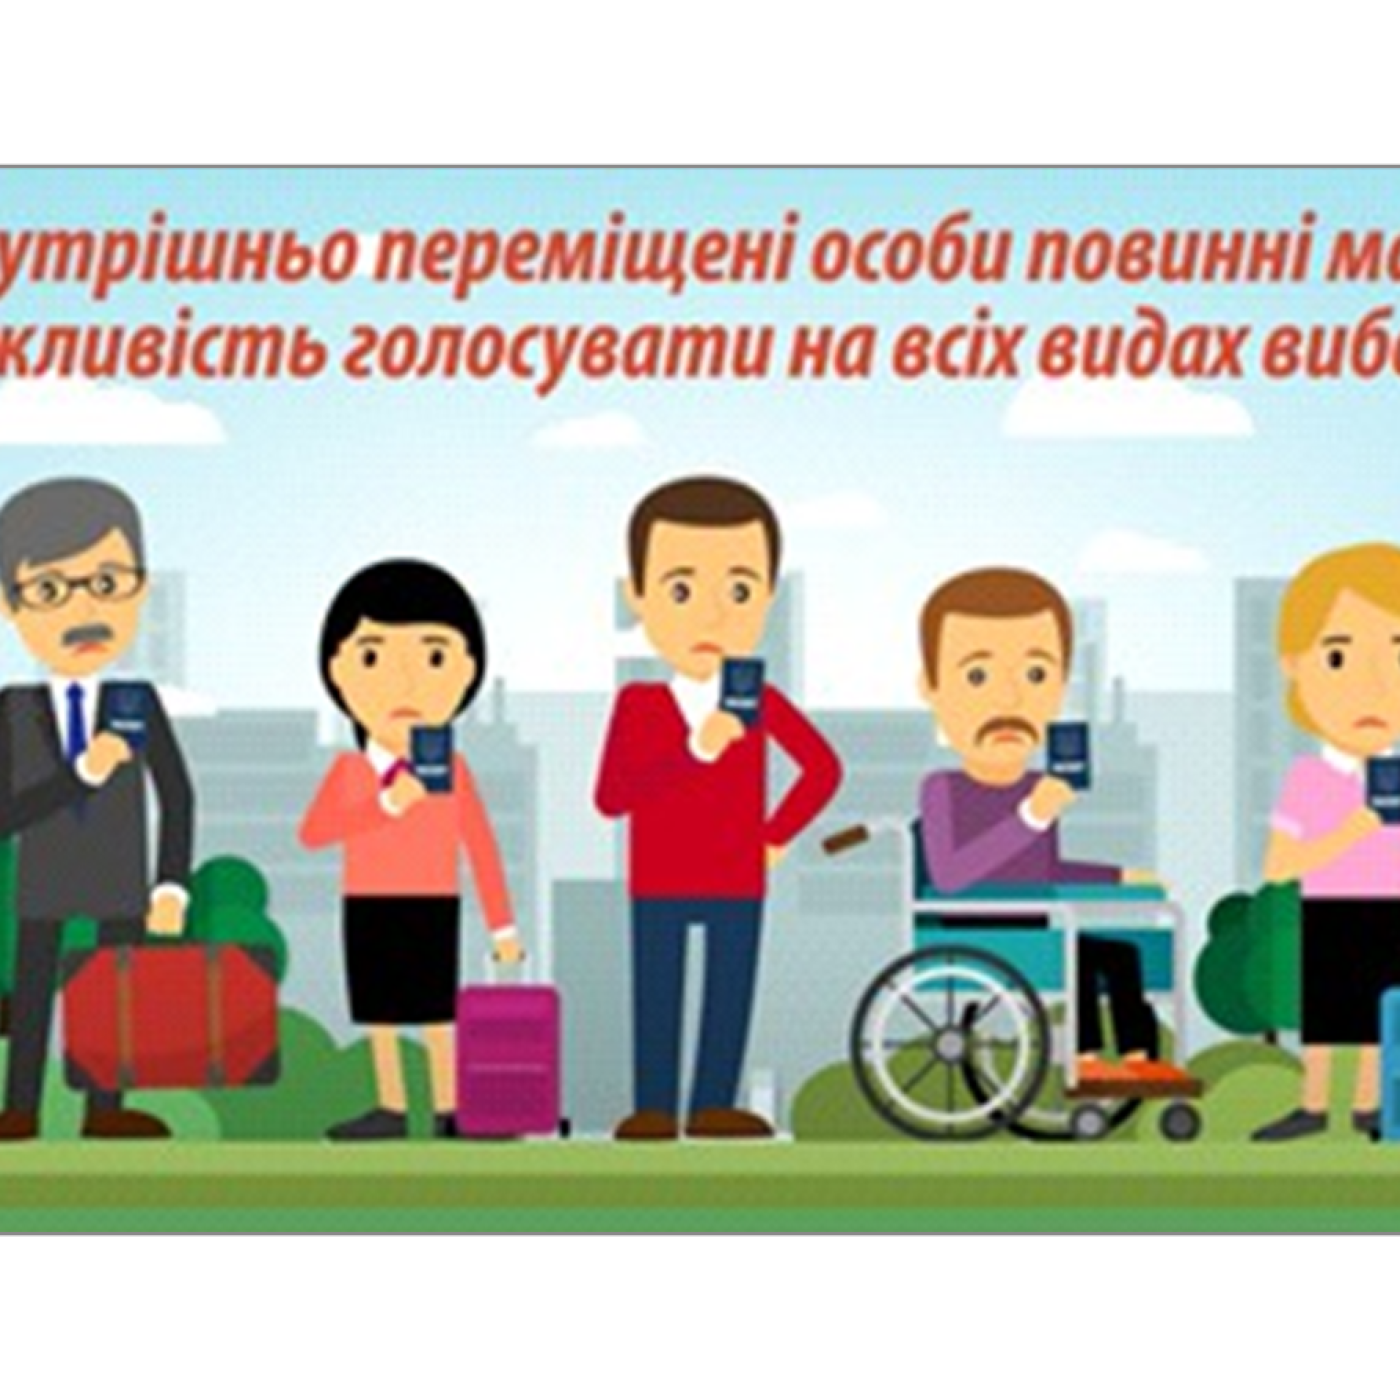 This informational video on the rights of internally displaced persons to vote in Ukraine mainstreams disability by including images of persons with disabilities alongside other citizens.